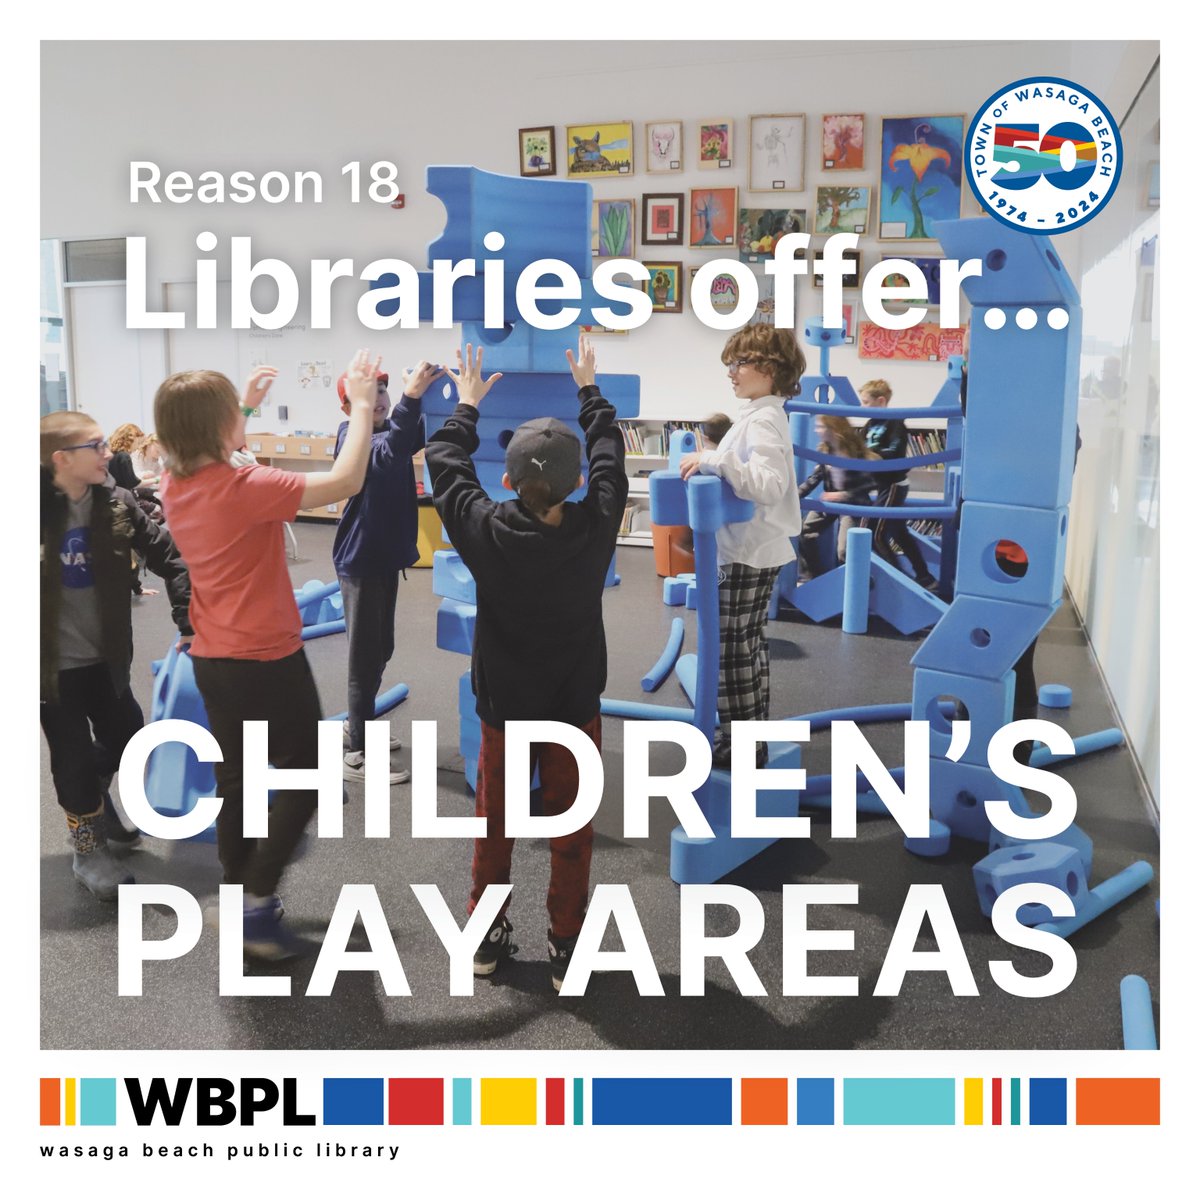 Reason #18 of 50 why libraries are great: Children’s Play Areas! 🧸 Libraries provide safe spaces where young ones can play, explore, and learn. These areas foster creativity and social skills, making the library welcoming place for families. #50YearsOfSunshine #FindItHere